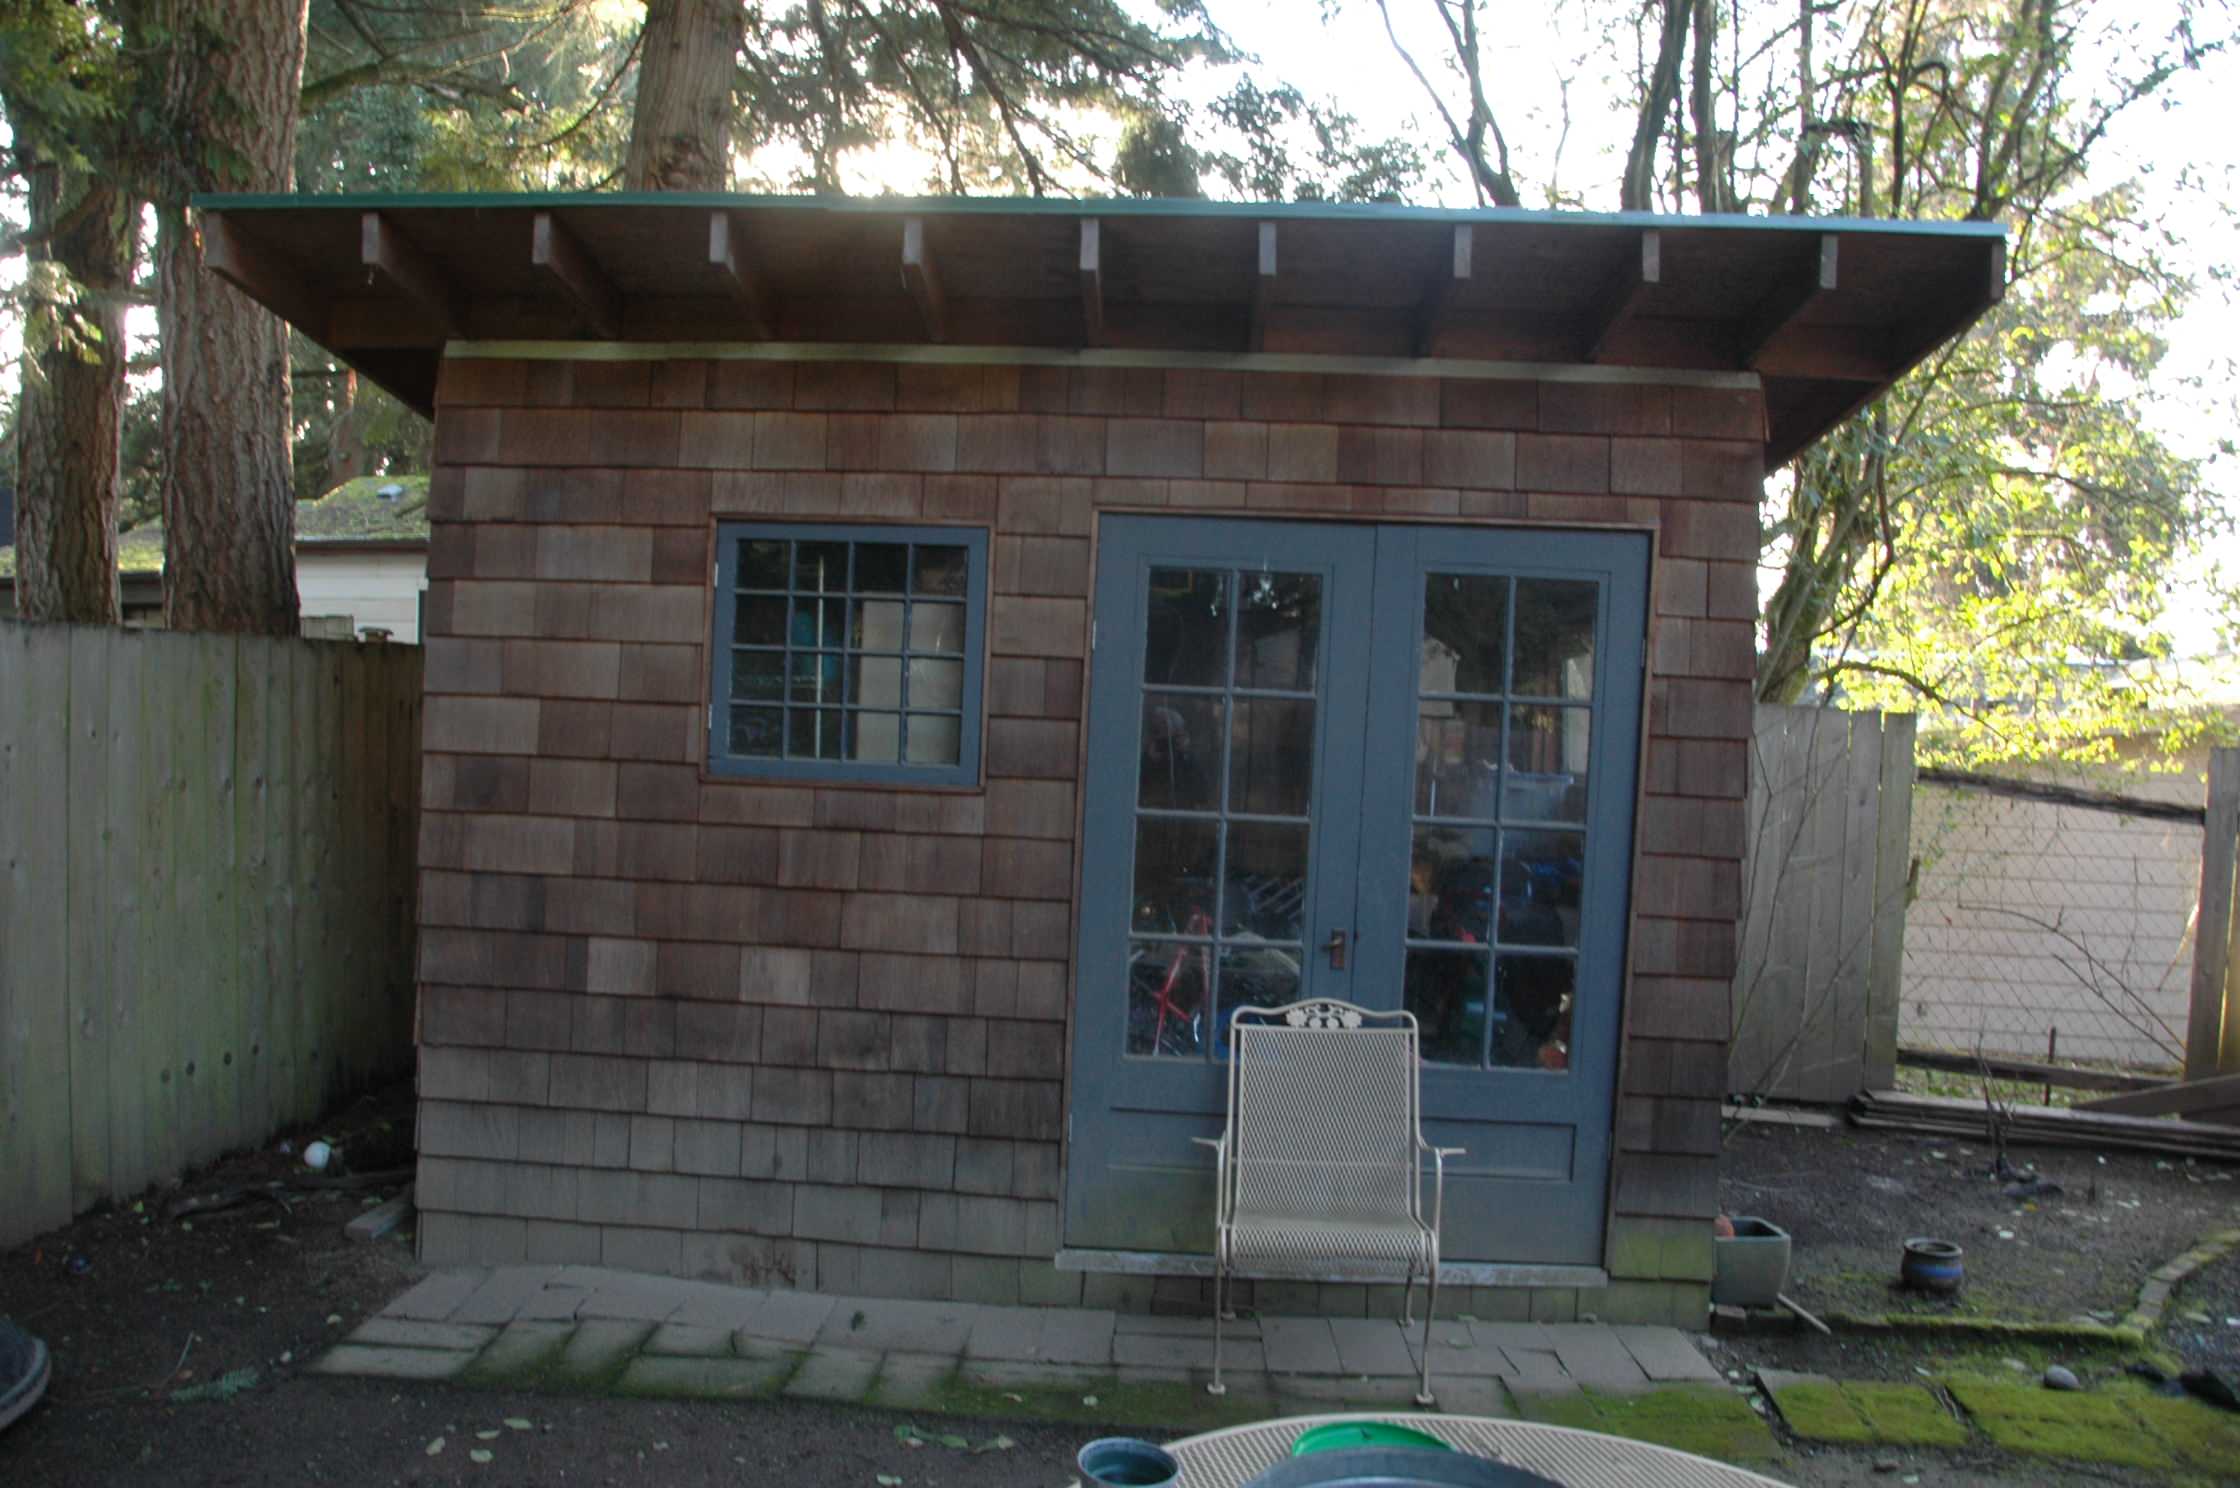 North Seattle Residence - existing shed